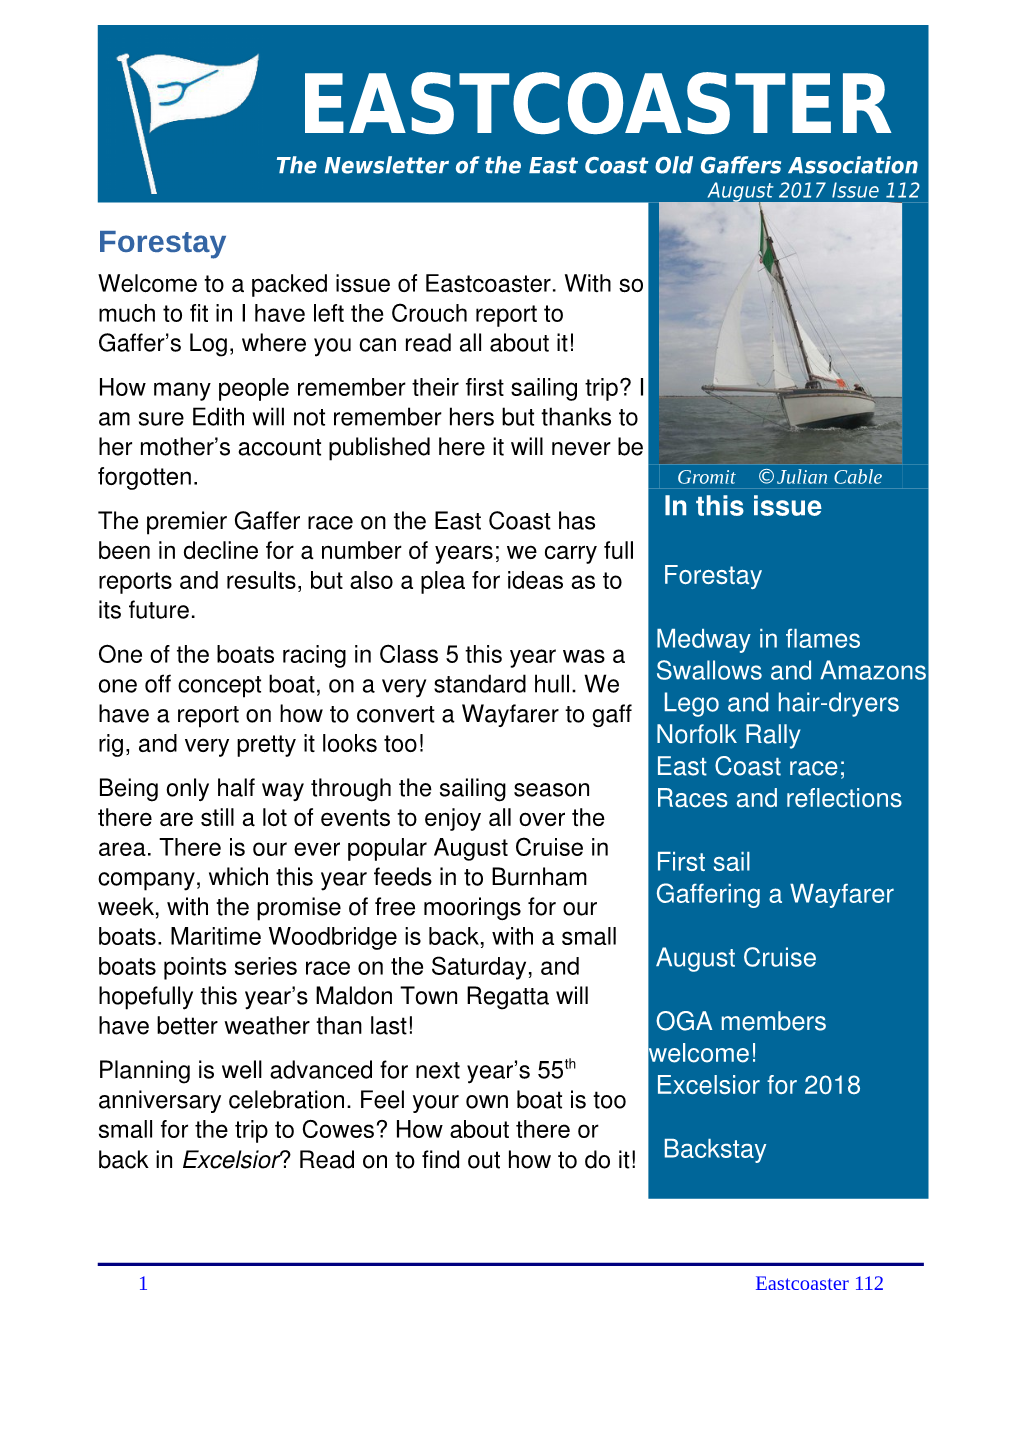 EASTCOASTER the Newsletter of the East Coast Old Gaffers Association August 2017 Issue 112 Forestay Welcome to a Packed Issue of Eastcoaster